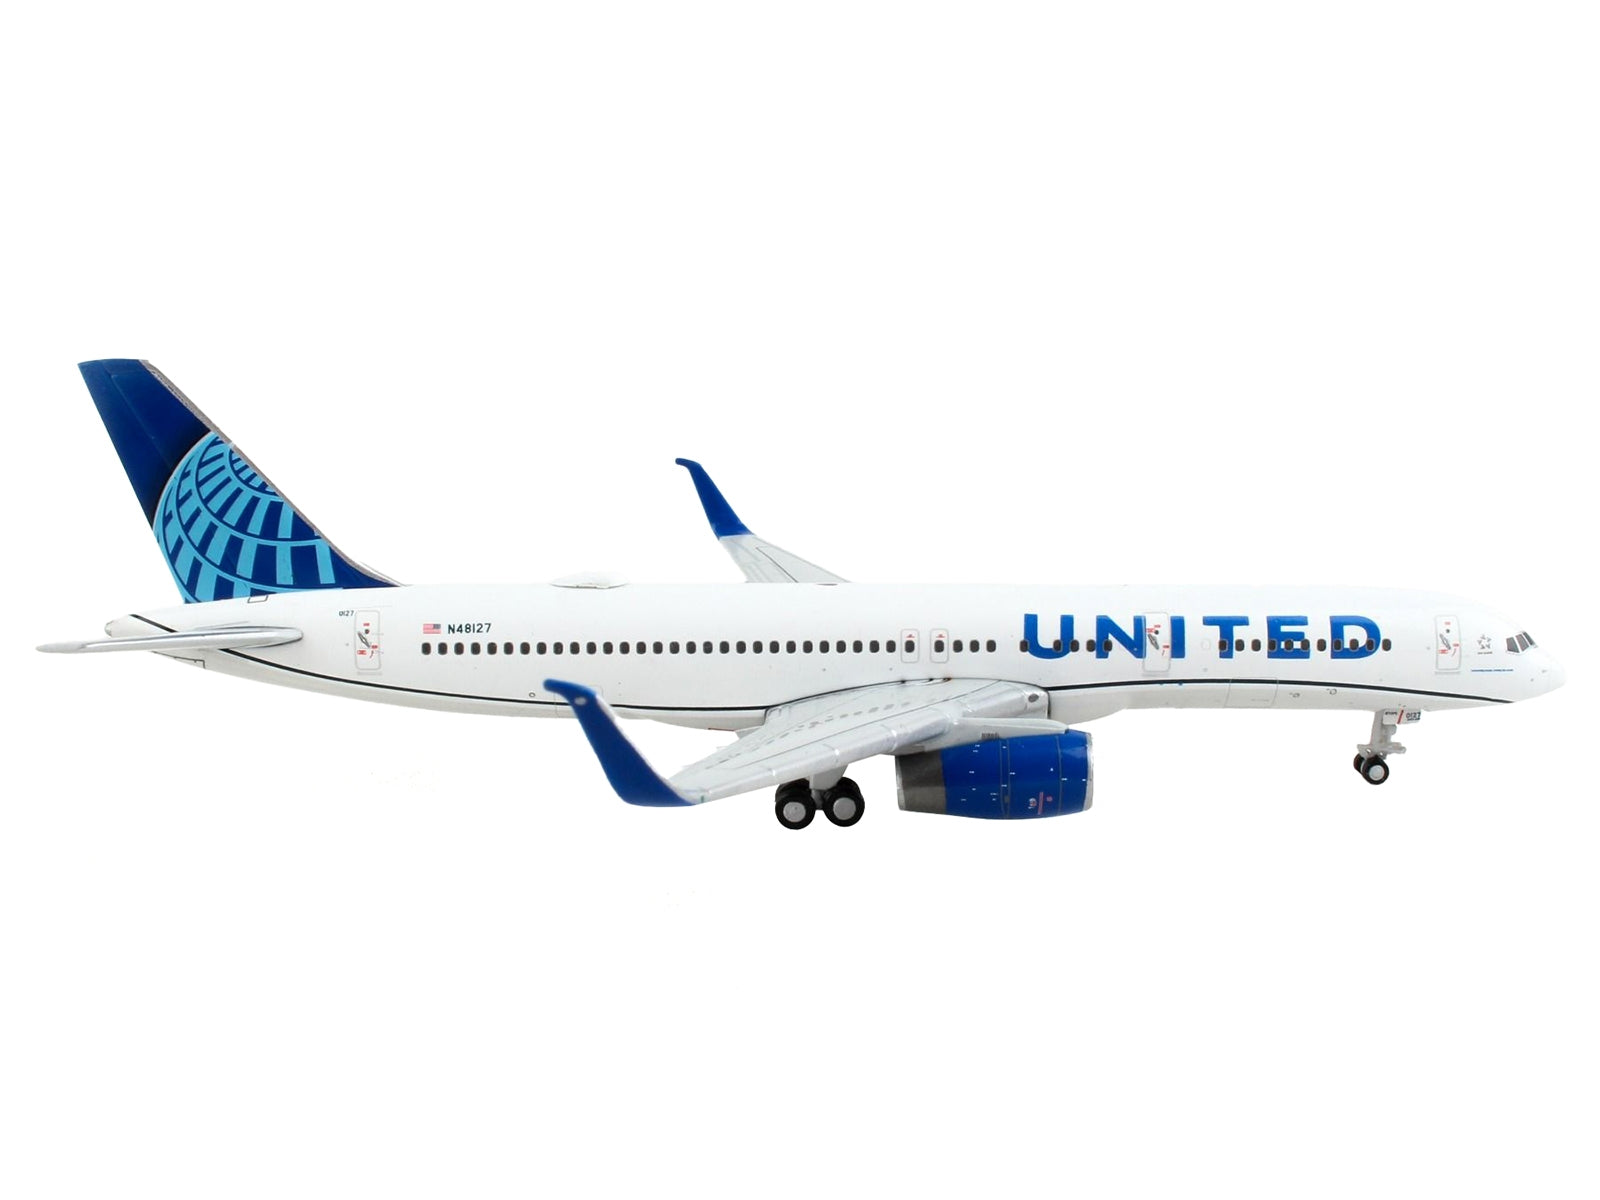 Boeing 757-200 Commercial Aircraft "United Airlines" White with Blue Tail 1/400 Diecast Model Airplane by GeminiJets